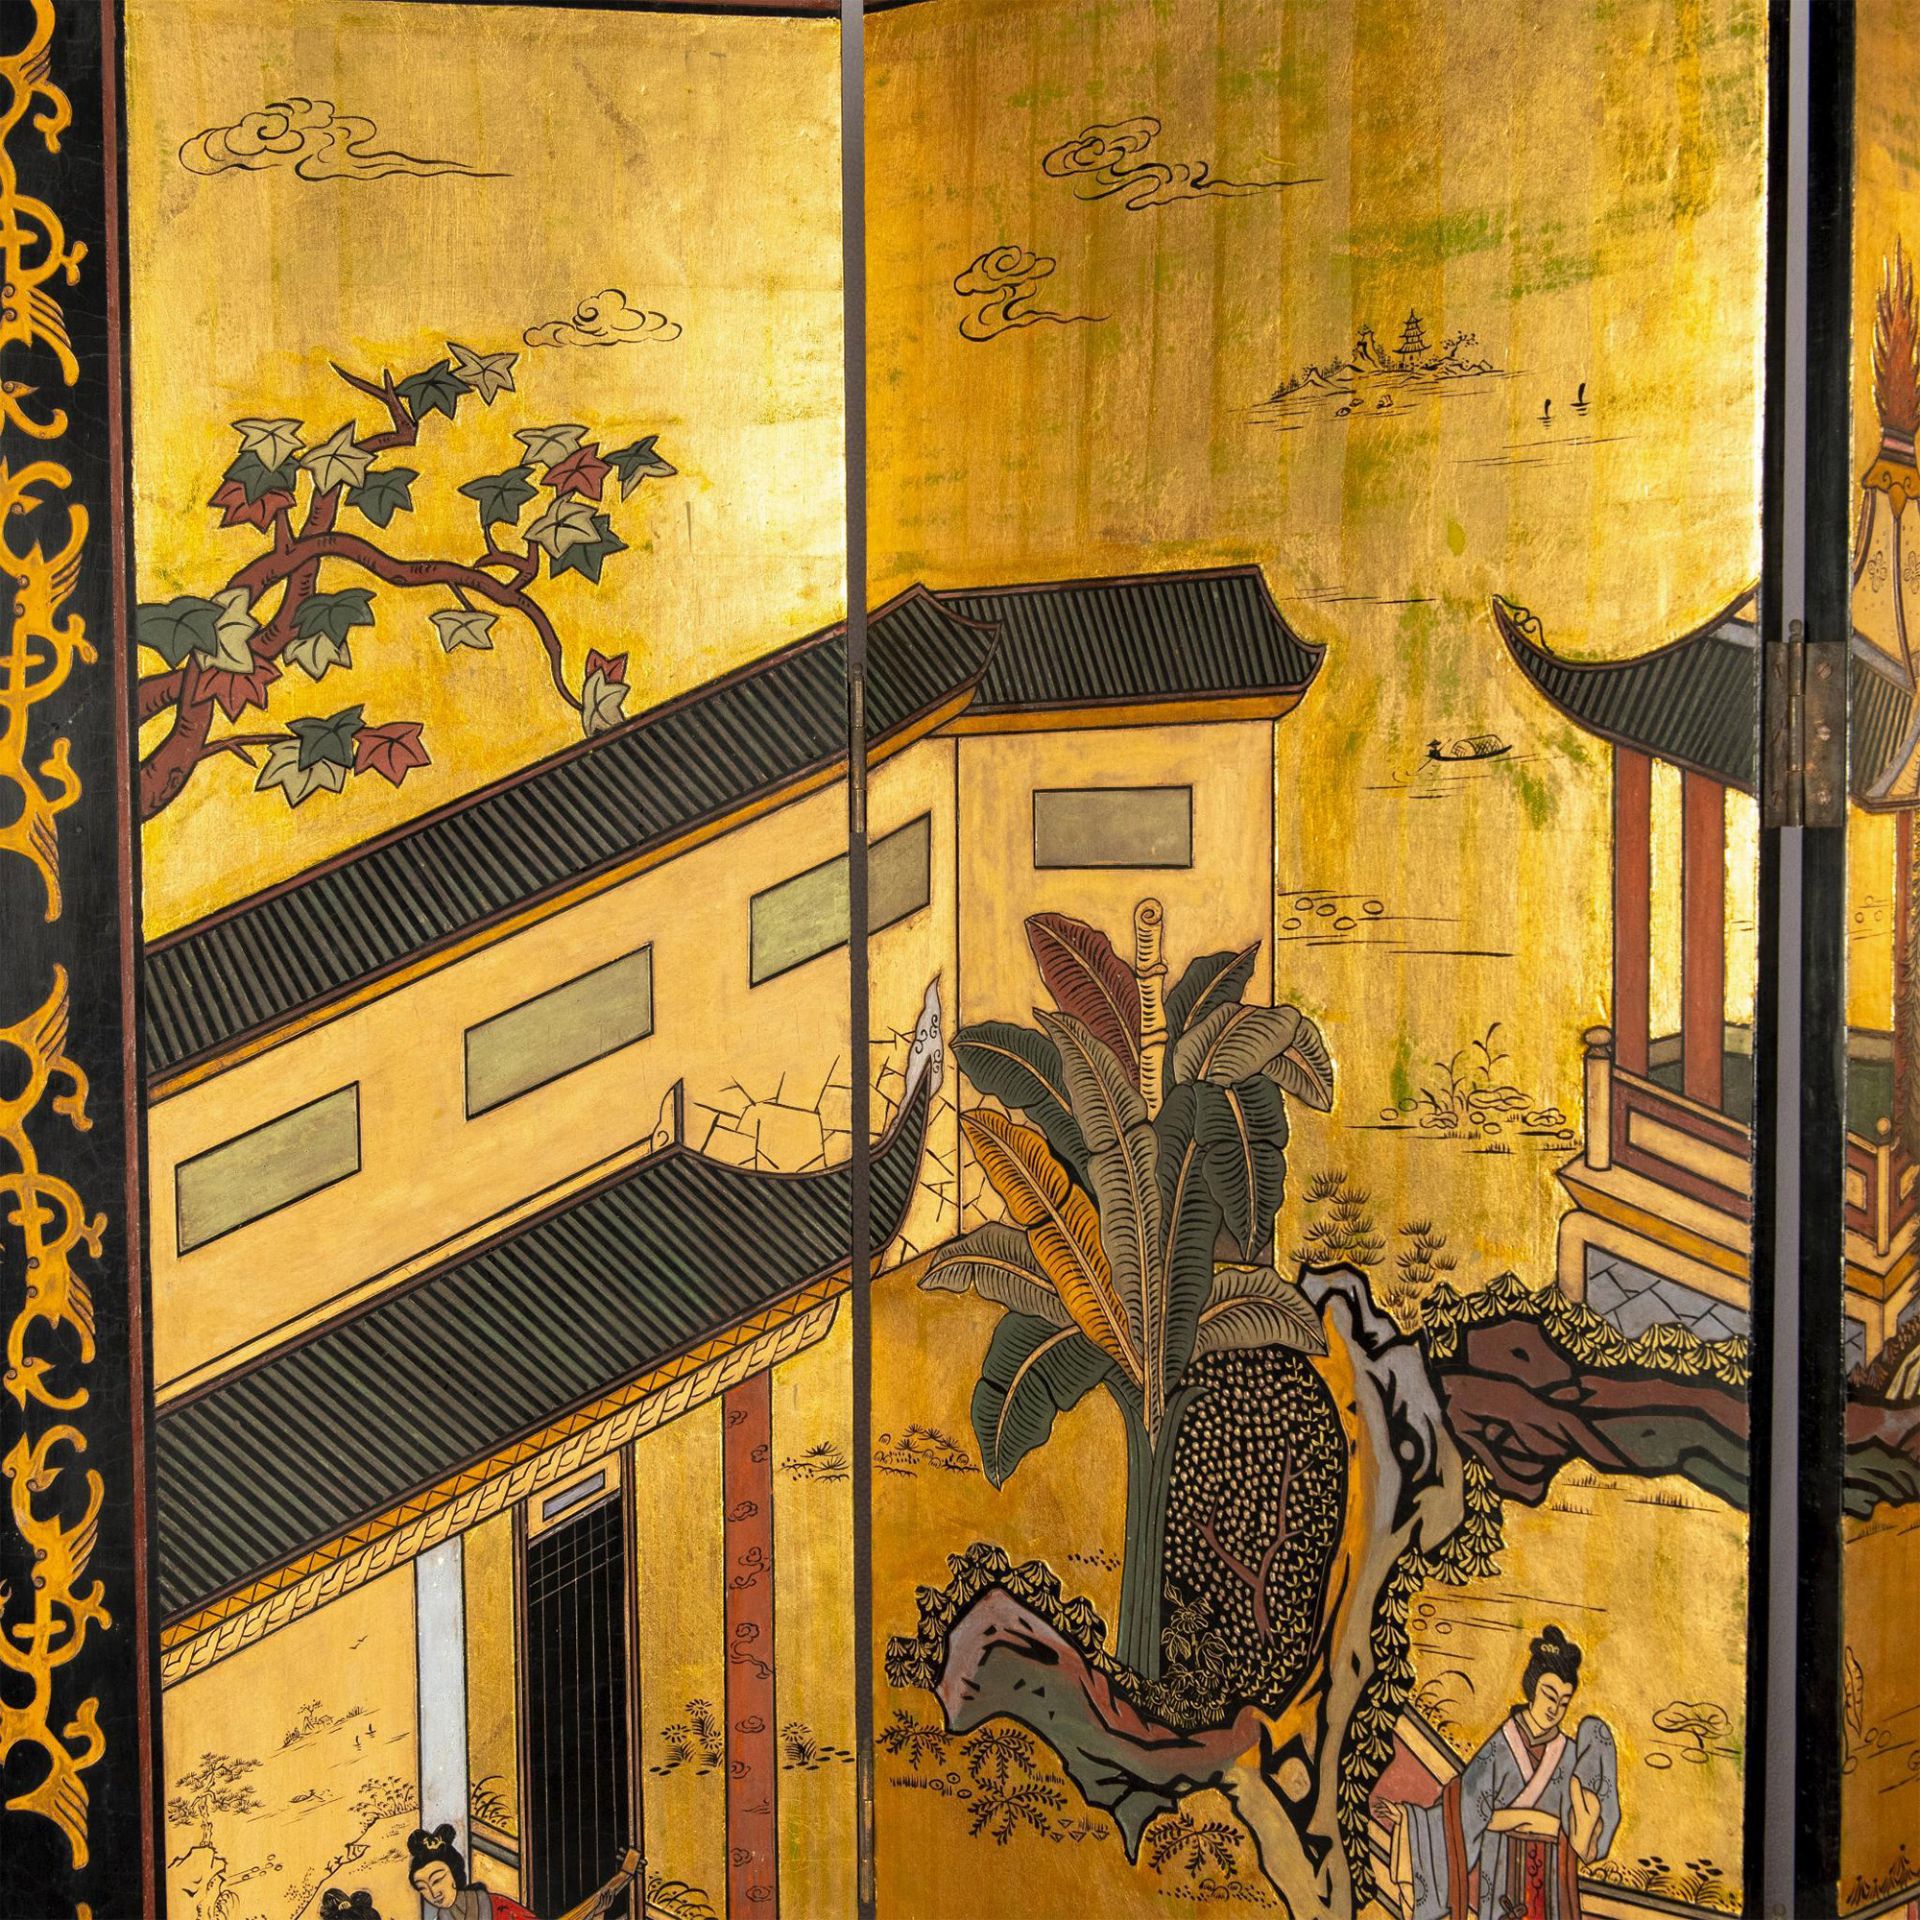 Original Gilded and Hand Painted Four Panel Asian Screen - Image 4 of 11